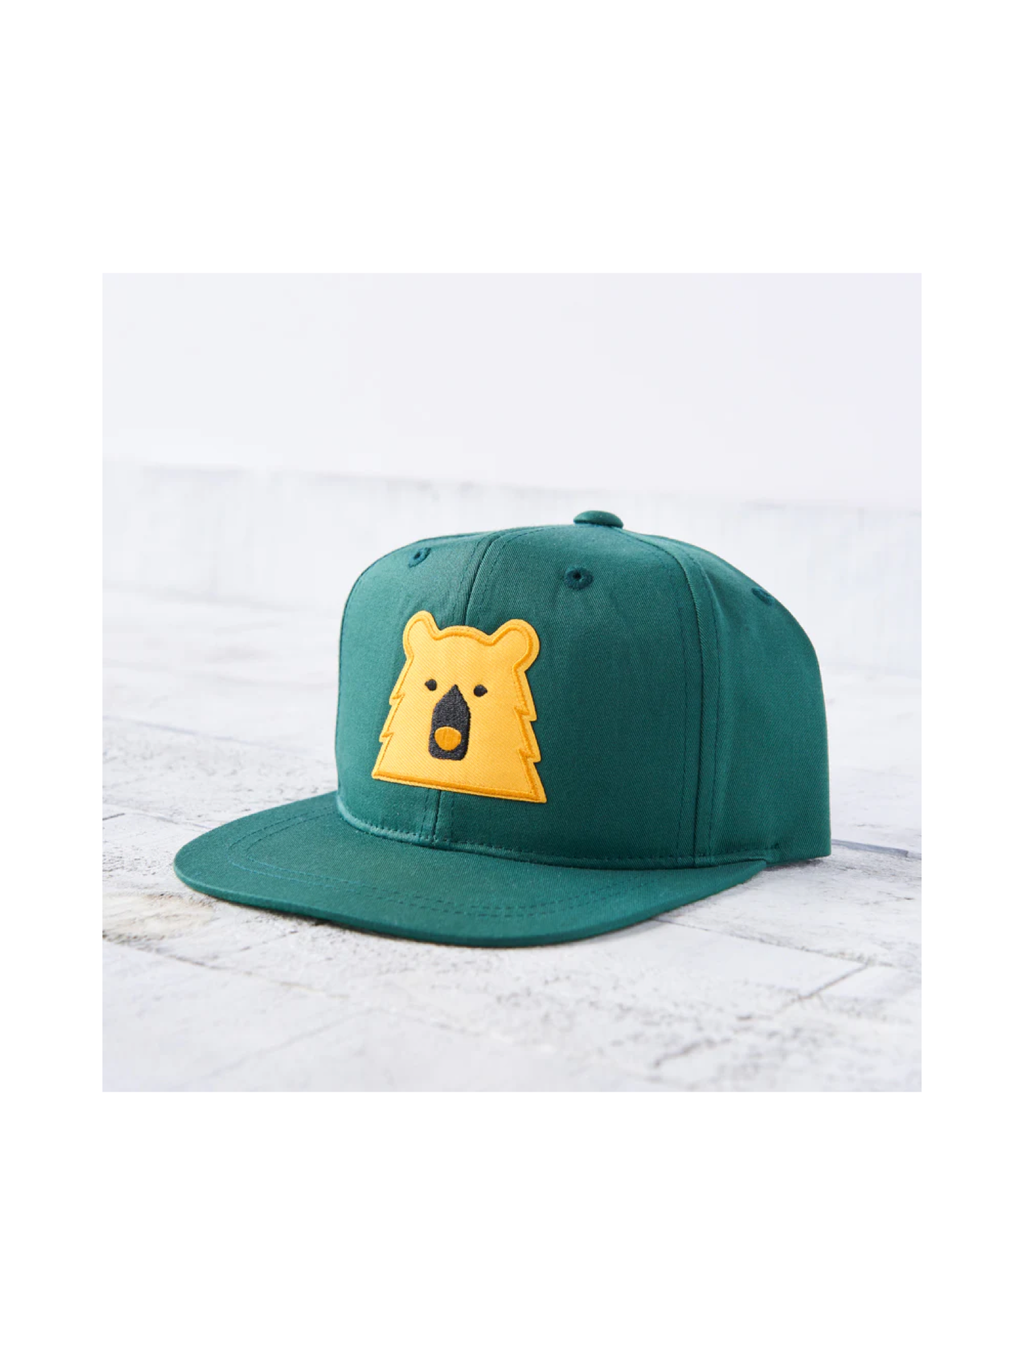 North Standard Youth Spruce/Gold Bear Hat